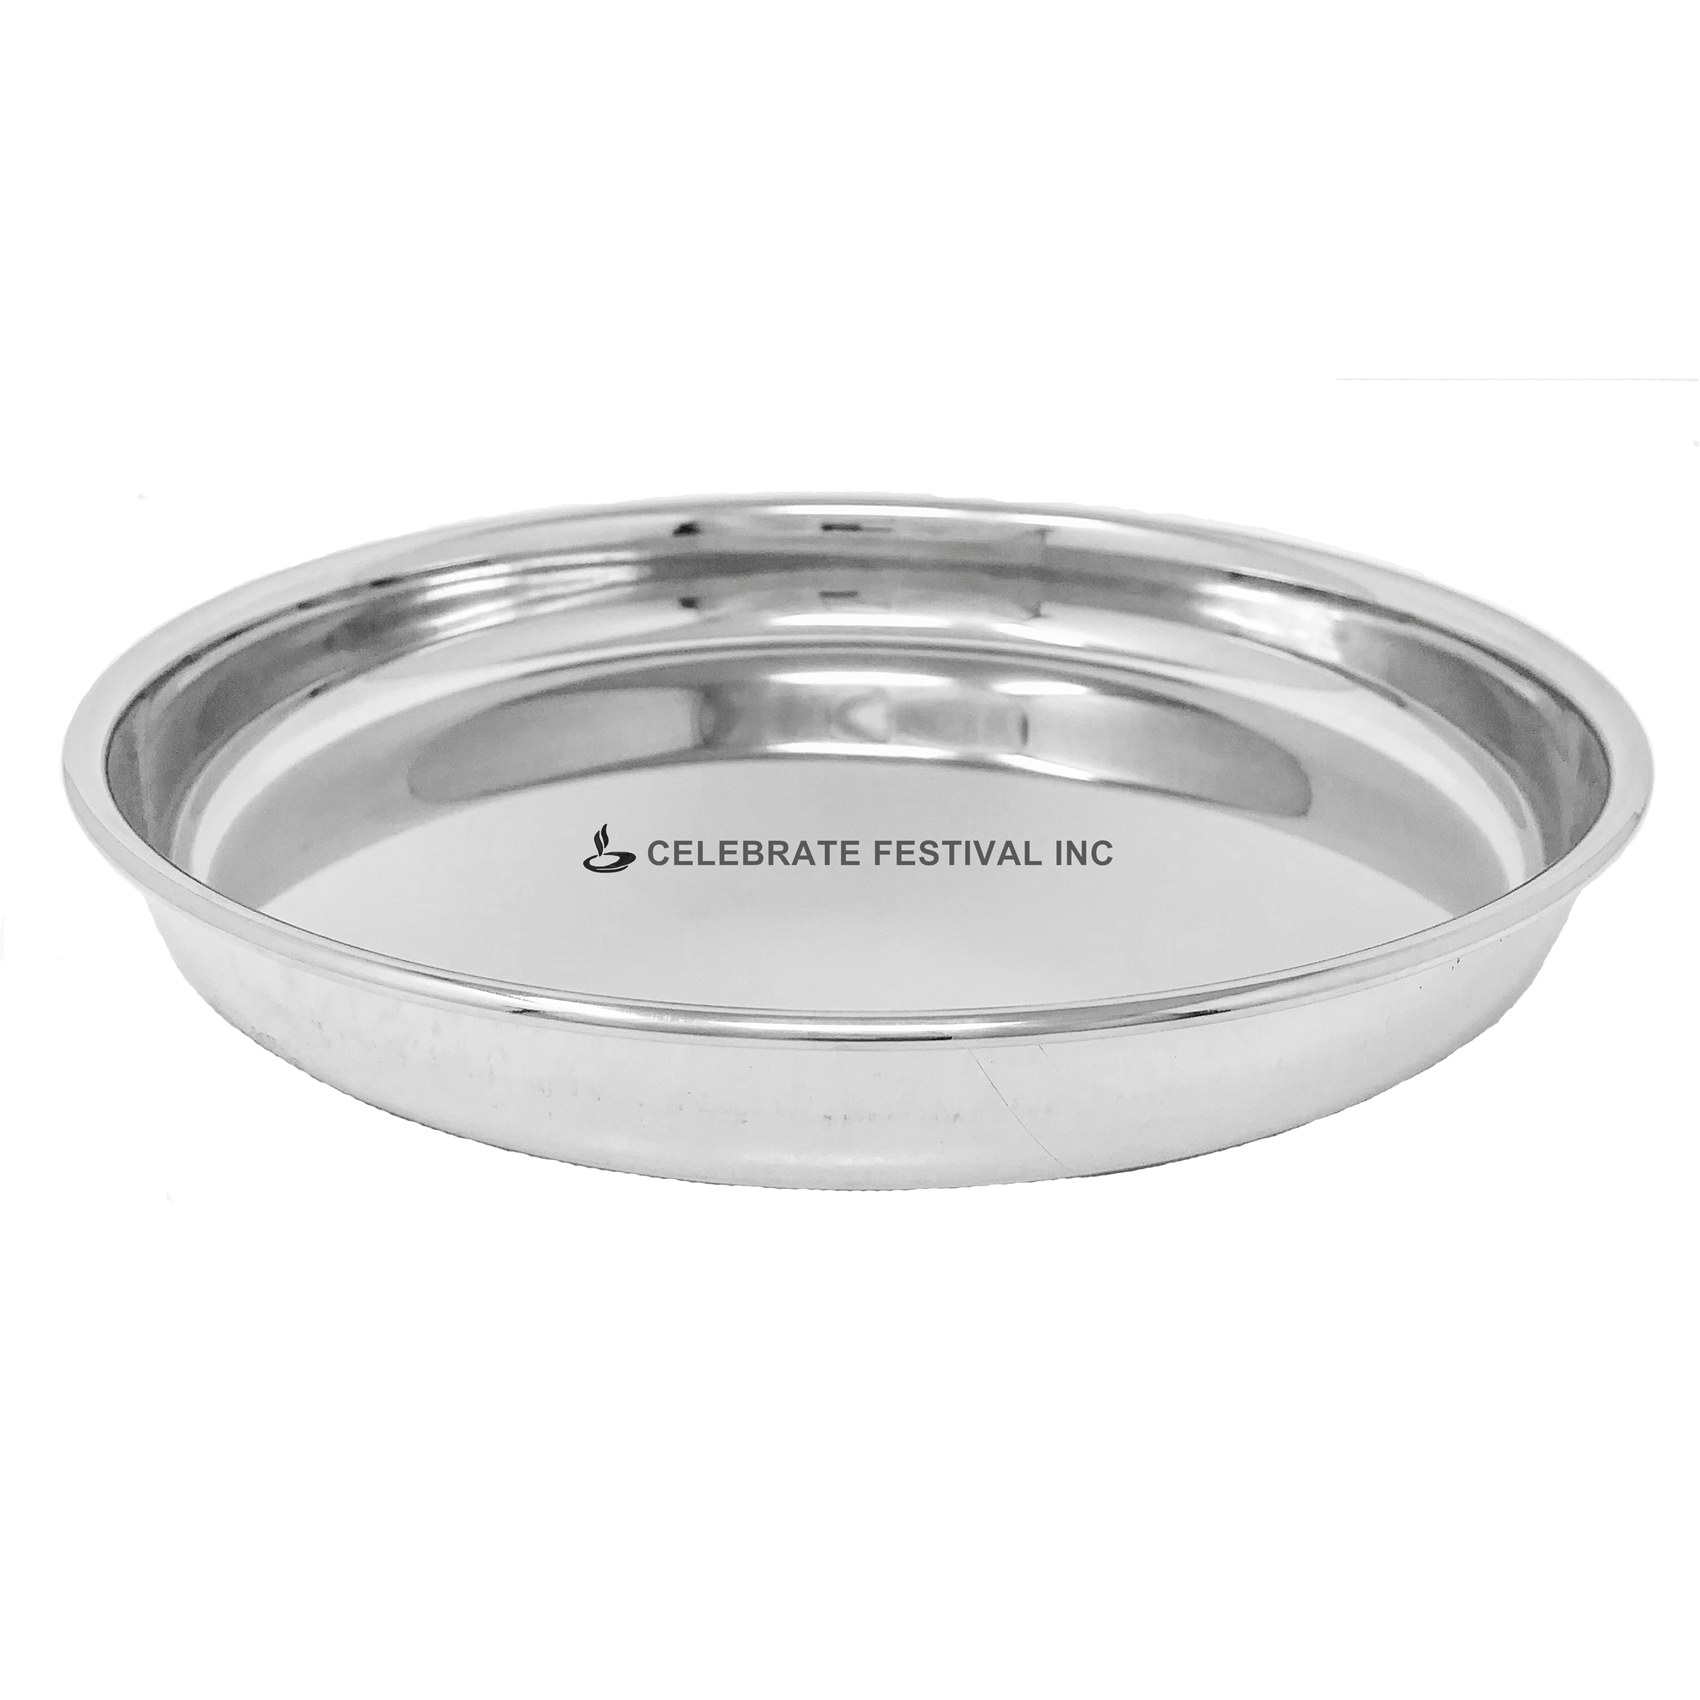 Stainless Steel Thali - 10" - made available by Celebrate Festival Inc